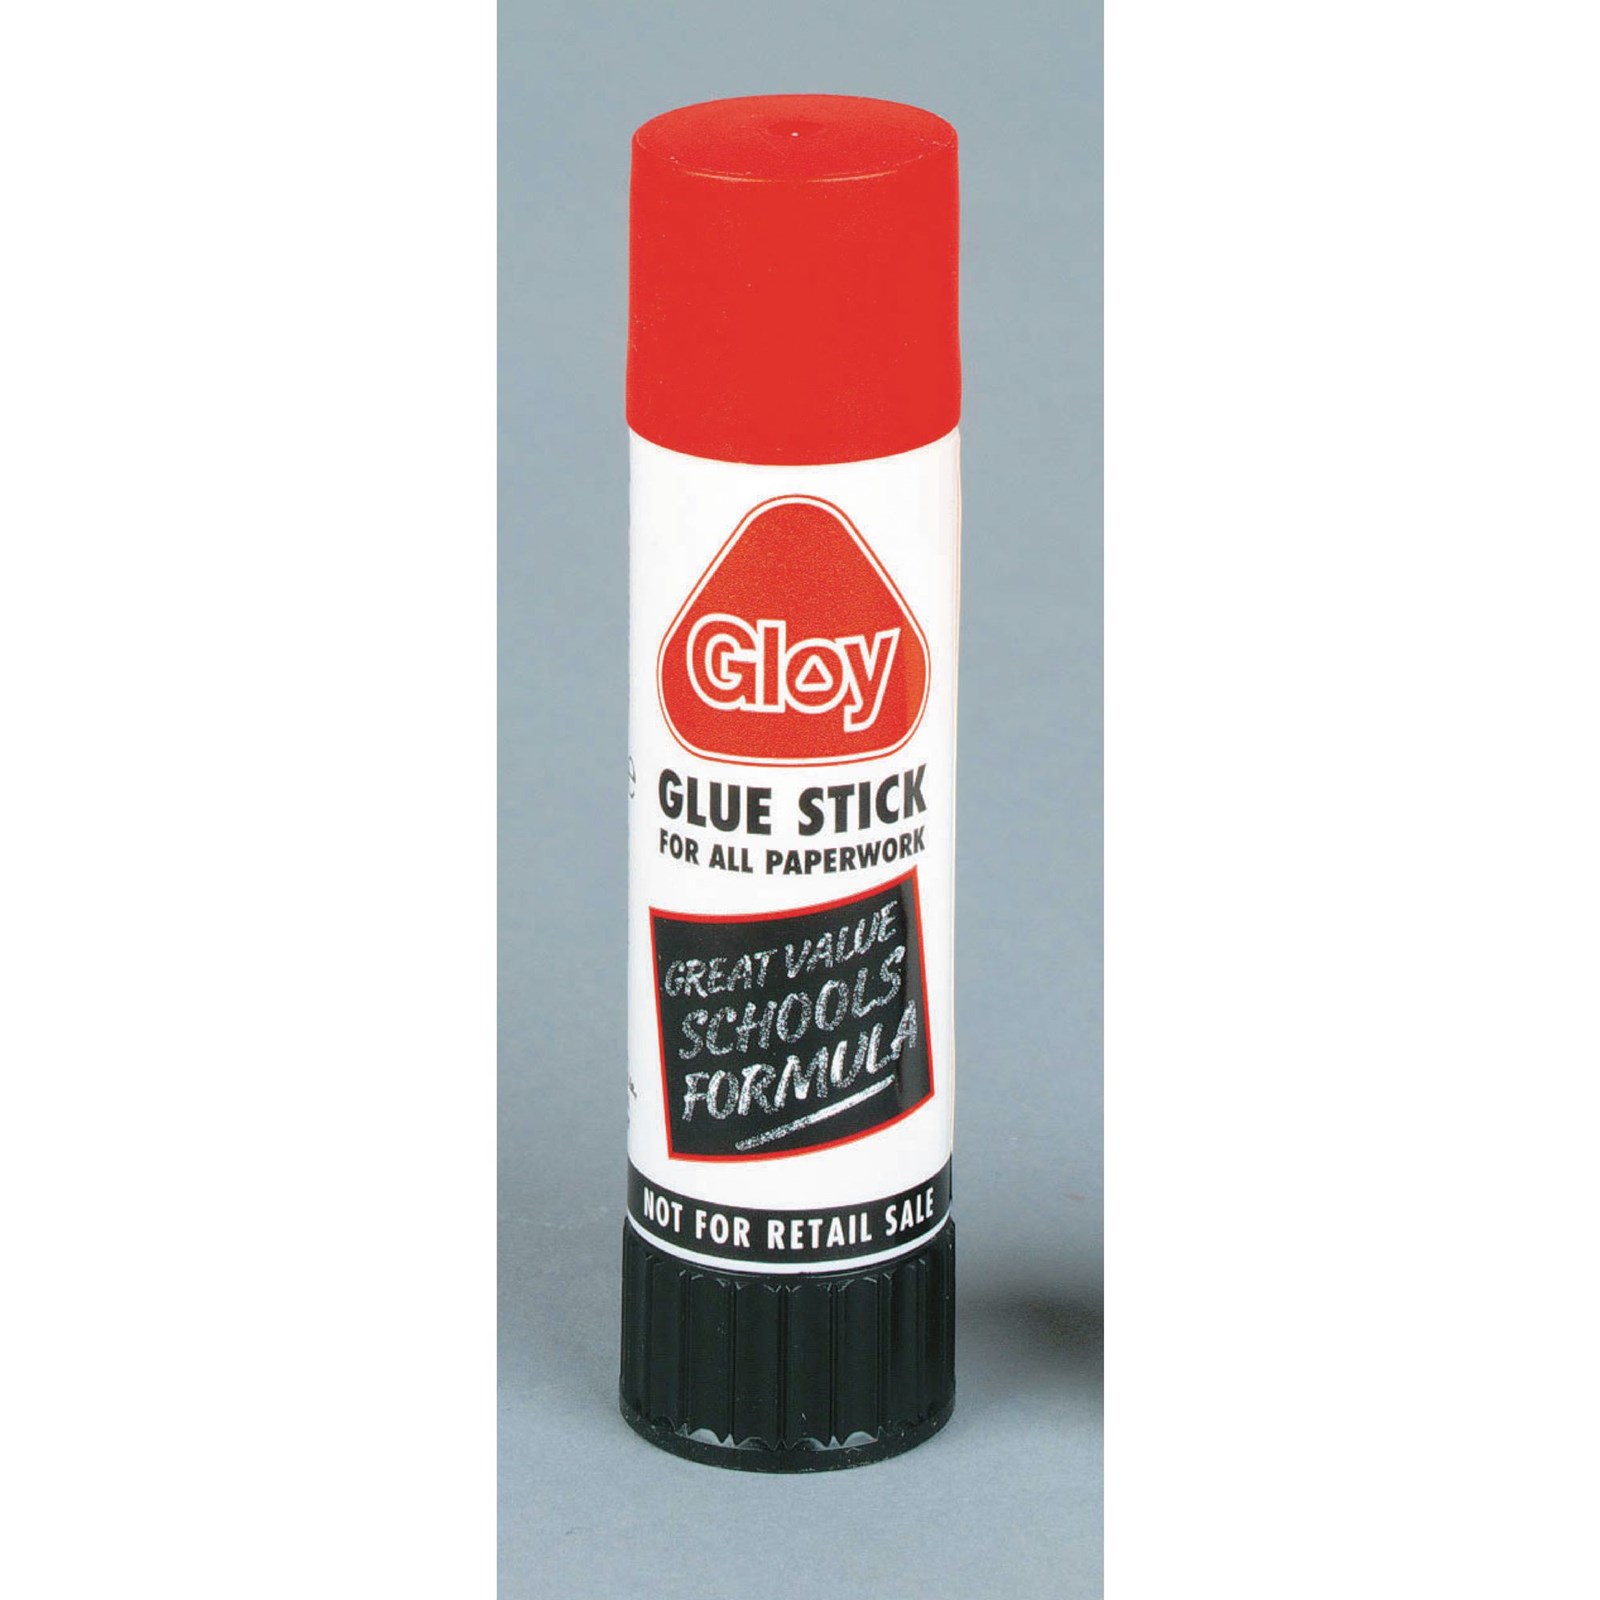 Gloy Glue Sticks Clear 40g - Pack of 100 | Hope Education